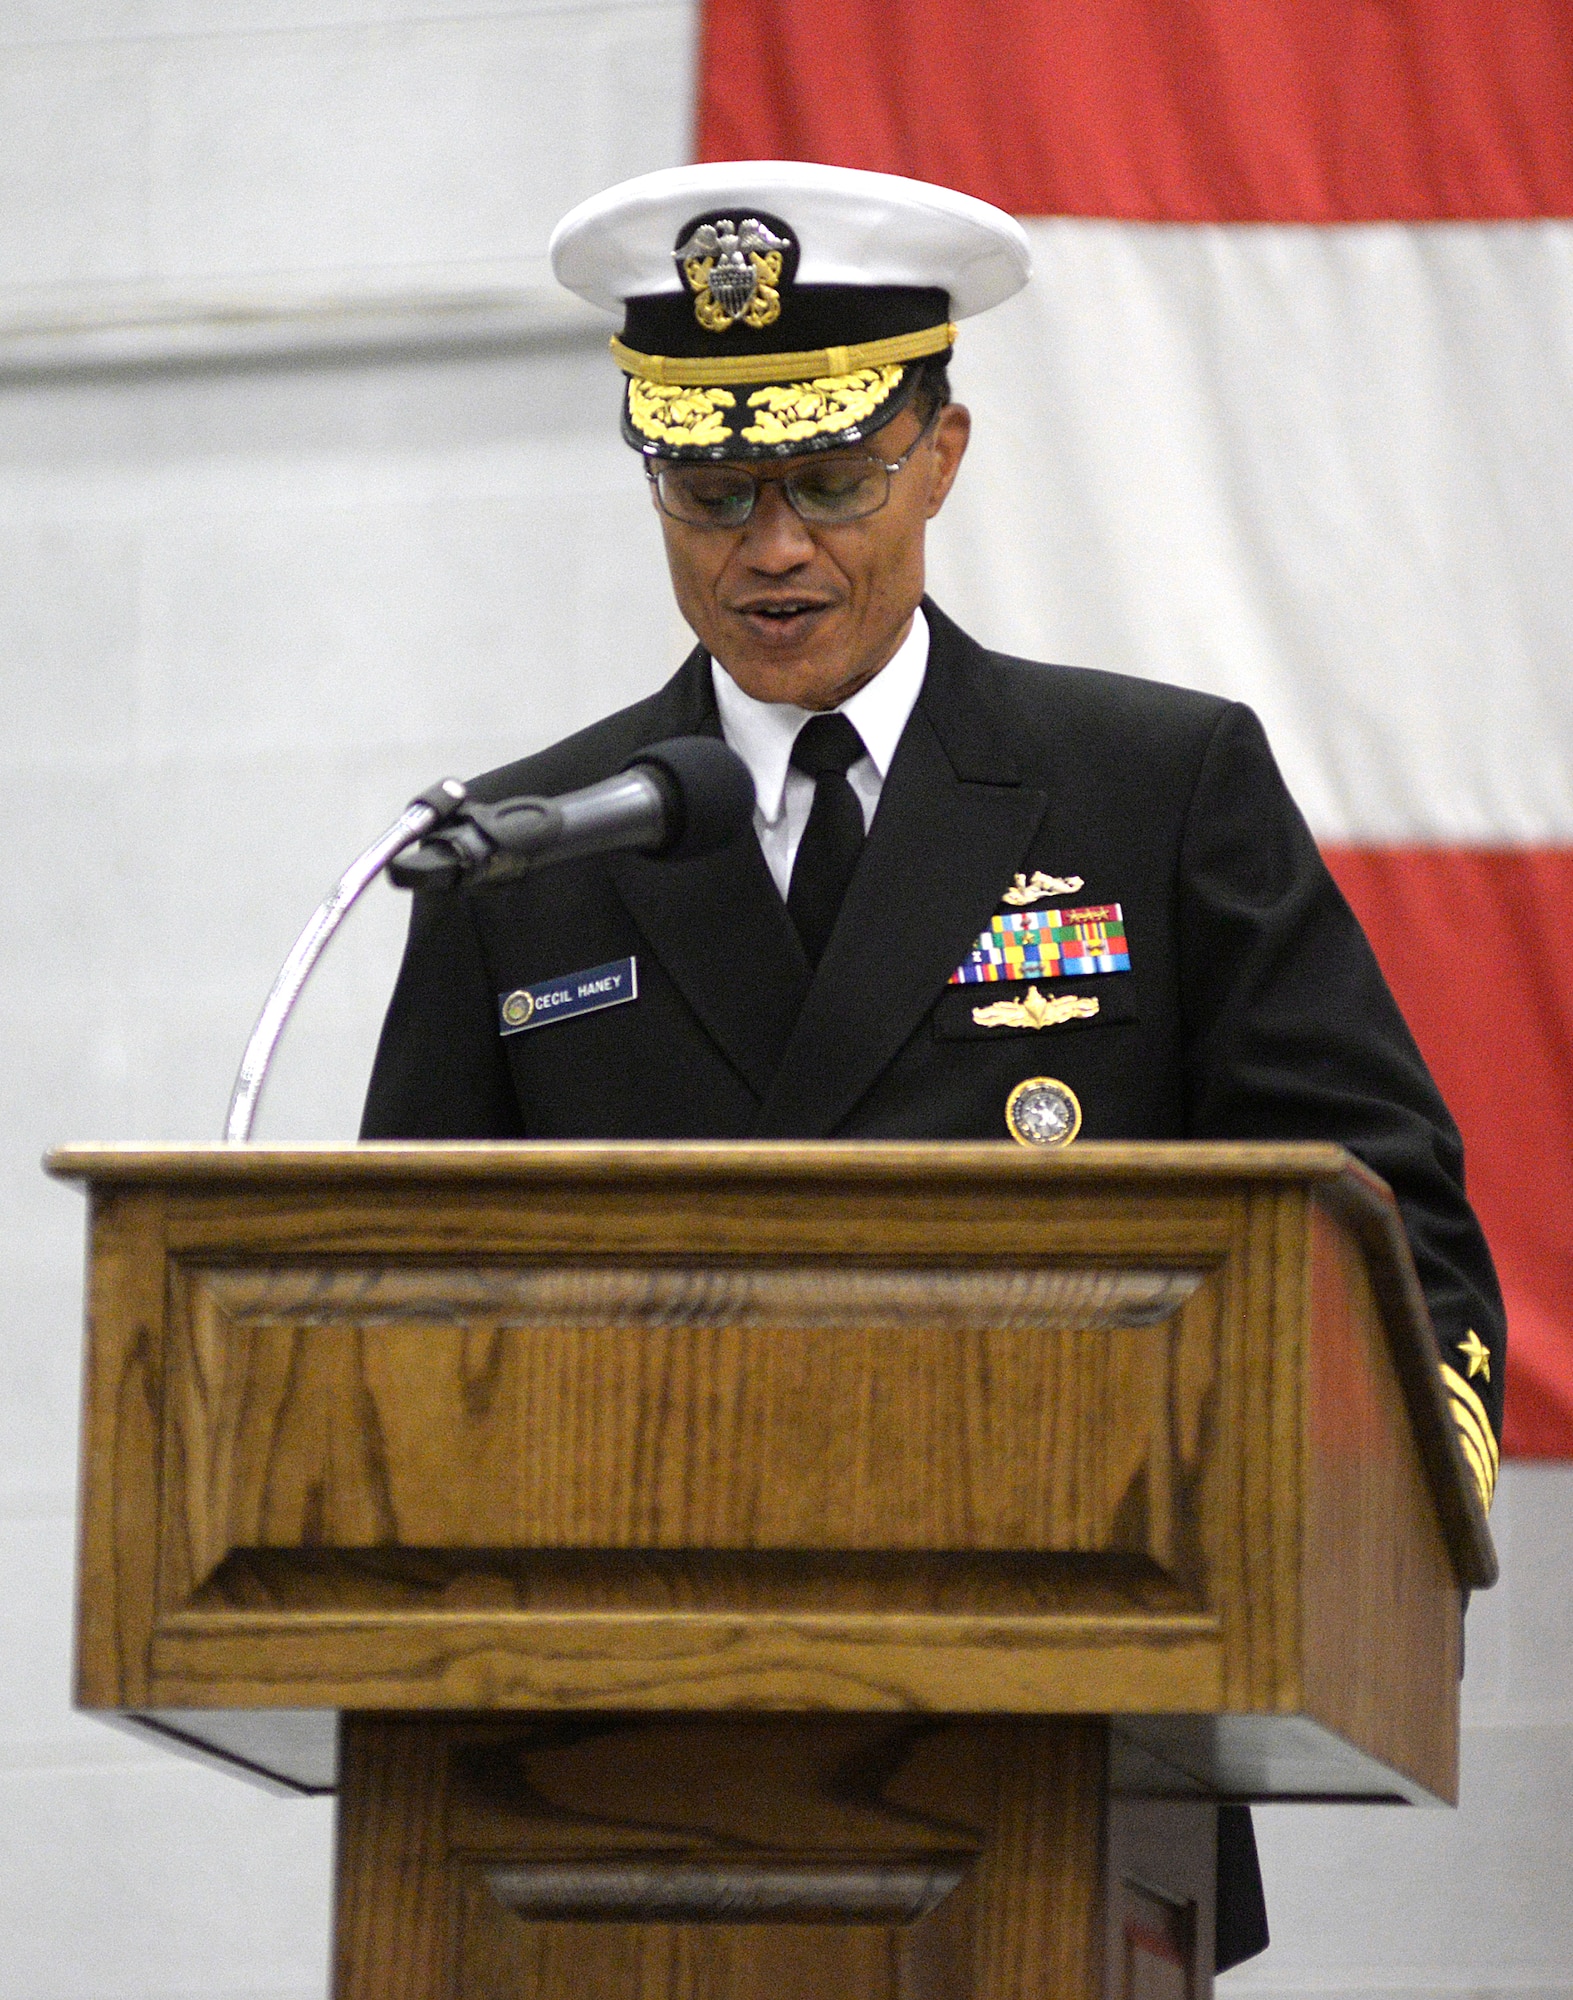 Adm. Cecil D. Haney, U.S. Strategic Command commander, addresses Airmen of the 20th Air Force and Task Force 214 during a change of command ceremony on F.E. Warren Air Force Base, Wyo., Nov. 16, 2015. Maj. Gen. Anthony J. Cotton assumed command of the two units during the ceremony. Task Force 214 is a USSTRATCOM component, while the 20th Air Force is part of Air Force Global Strike Command. TF 214 provides the President of the United States with responsive and highly reliable strategic missile forces, and supports USSTRATCOM's strategic deterrence mission by operating and maintaining the Air Force's Intercontinental Ballistic Missile force. One of nine DoD unified combatant commands, USSTRATCOM has global strategic missions, assigned through the Unified Command Plan, which also include space operations; cyberspace operations; joint electronic warfare; global strike; missile defense; intelligence, surveillance and reconnaissance; combating weapons of mass destruction; and analysis and targeting.  (U.S. Air Force photo by R.J. Oriez/Released)